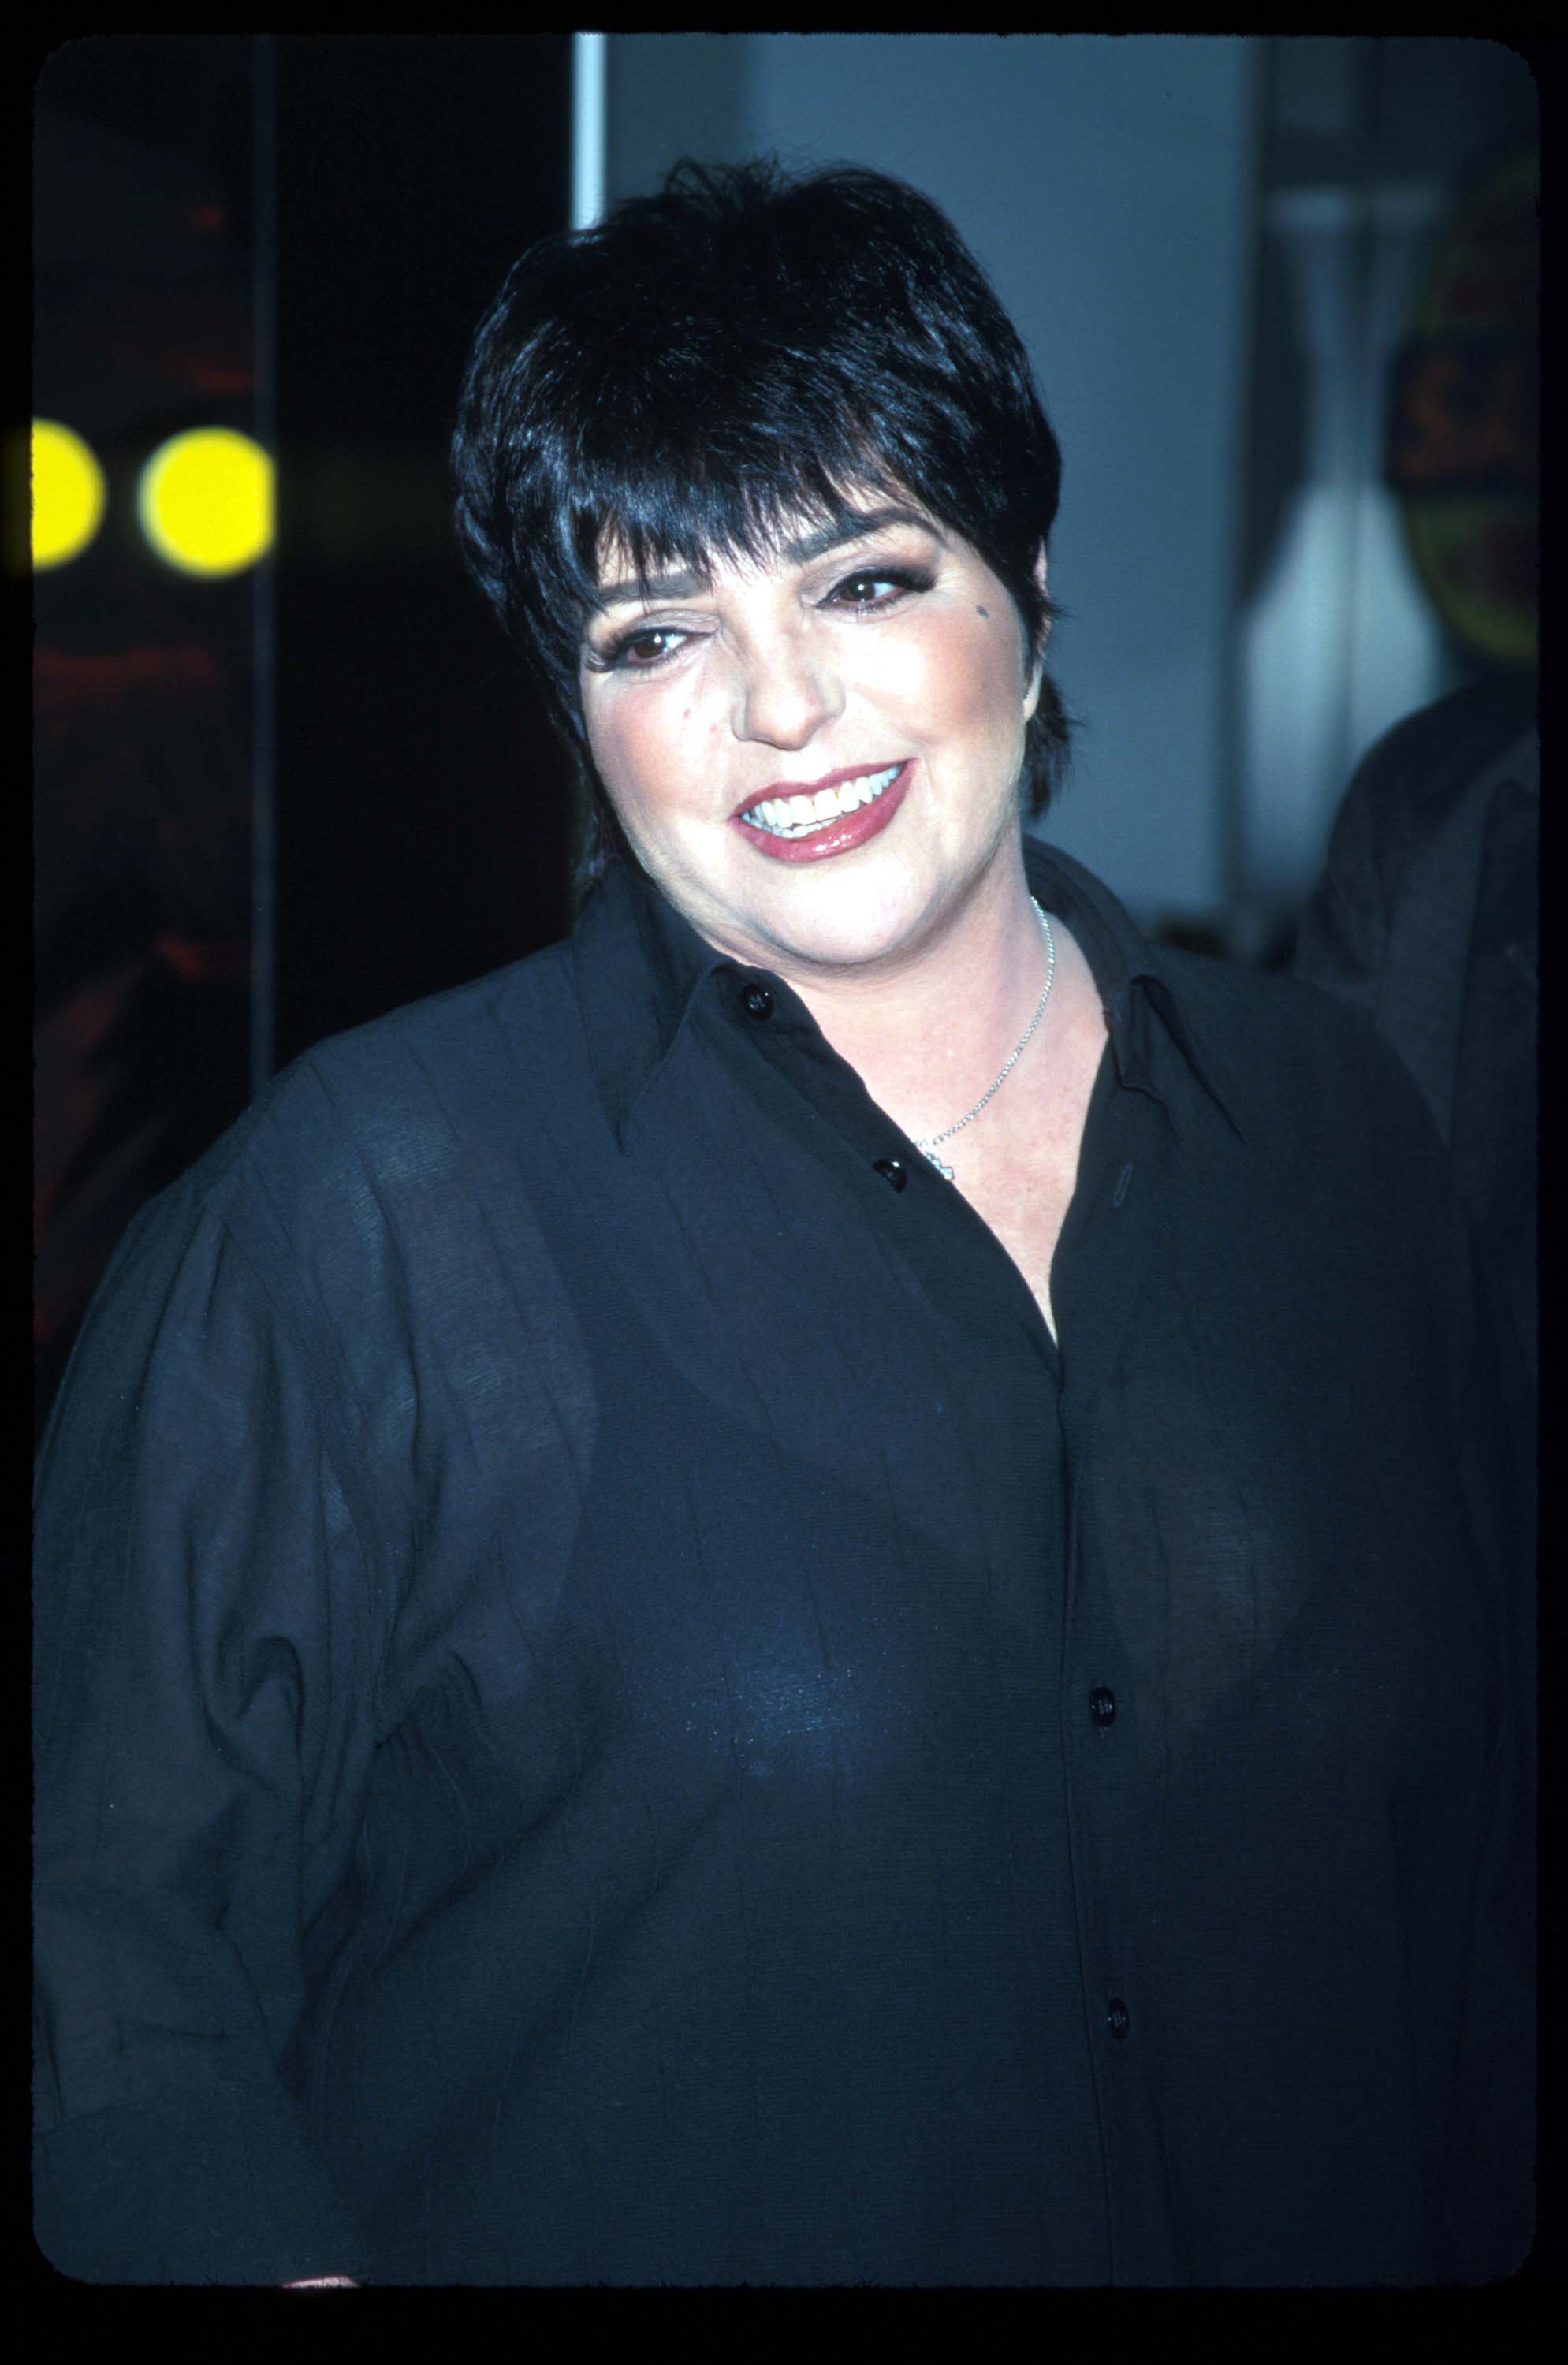 Liza Minnelli stands during a promotional tour for her album "Minnelli on Minnelli" on March 20, 2000, in New York City. | Source: Getty Images